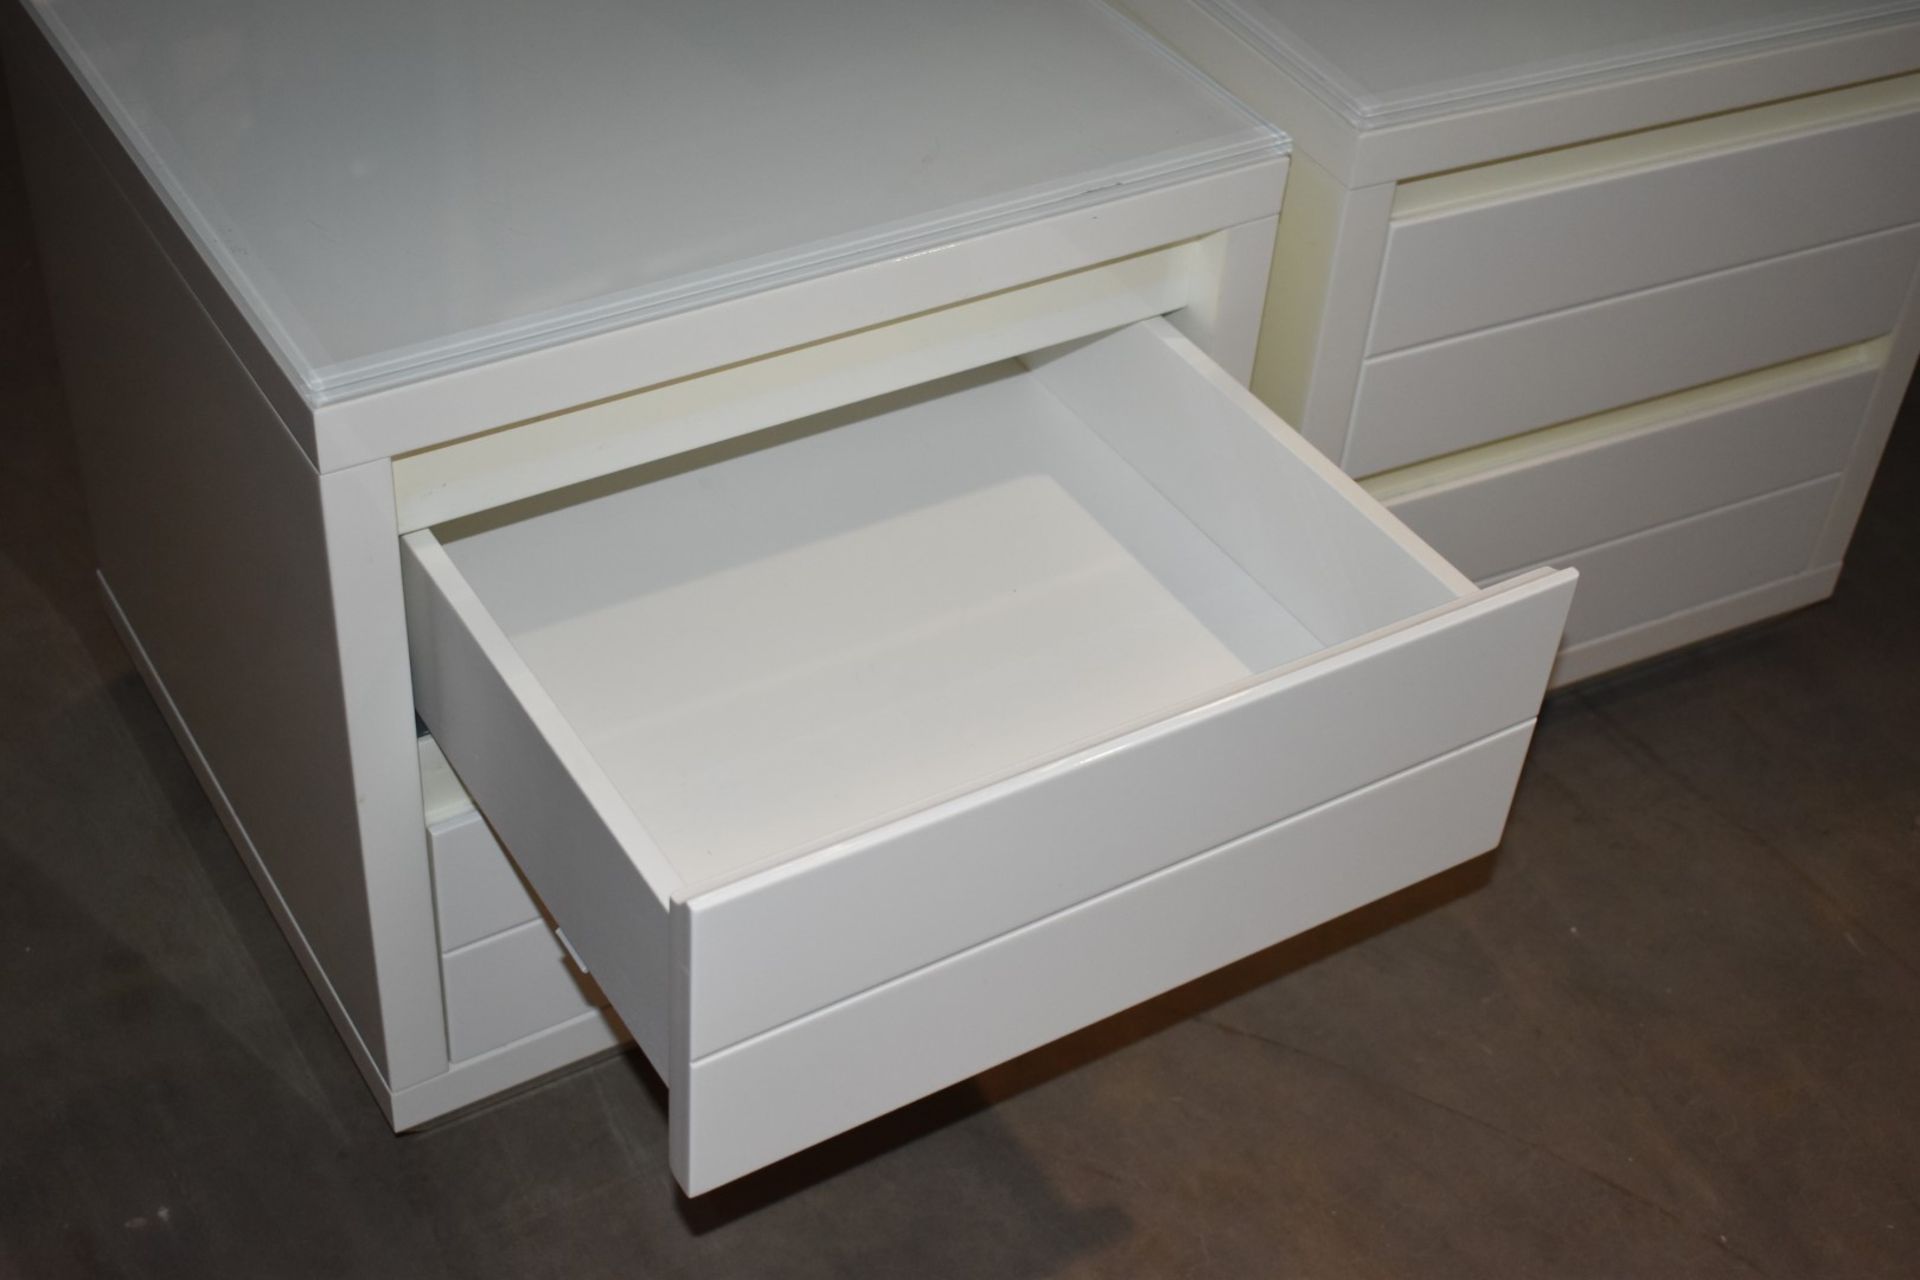 1 Pair of Casabella Adria Bedside Drawers - White Gloss With Glass Top and Soft Close Drawers  - - Image 3 of 6